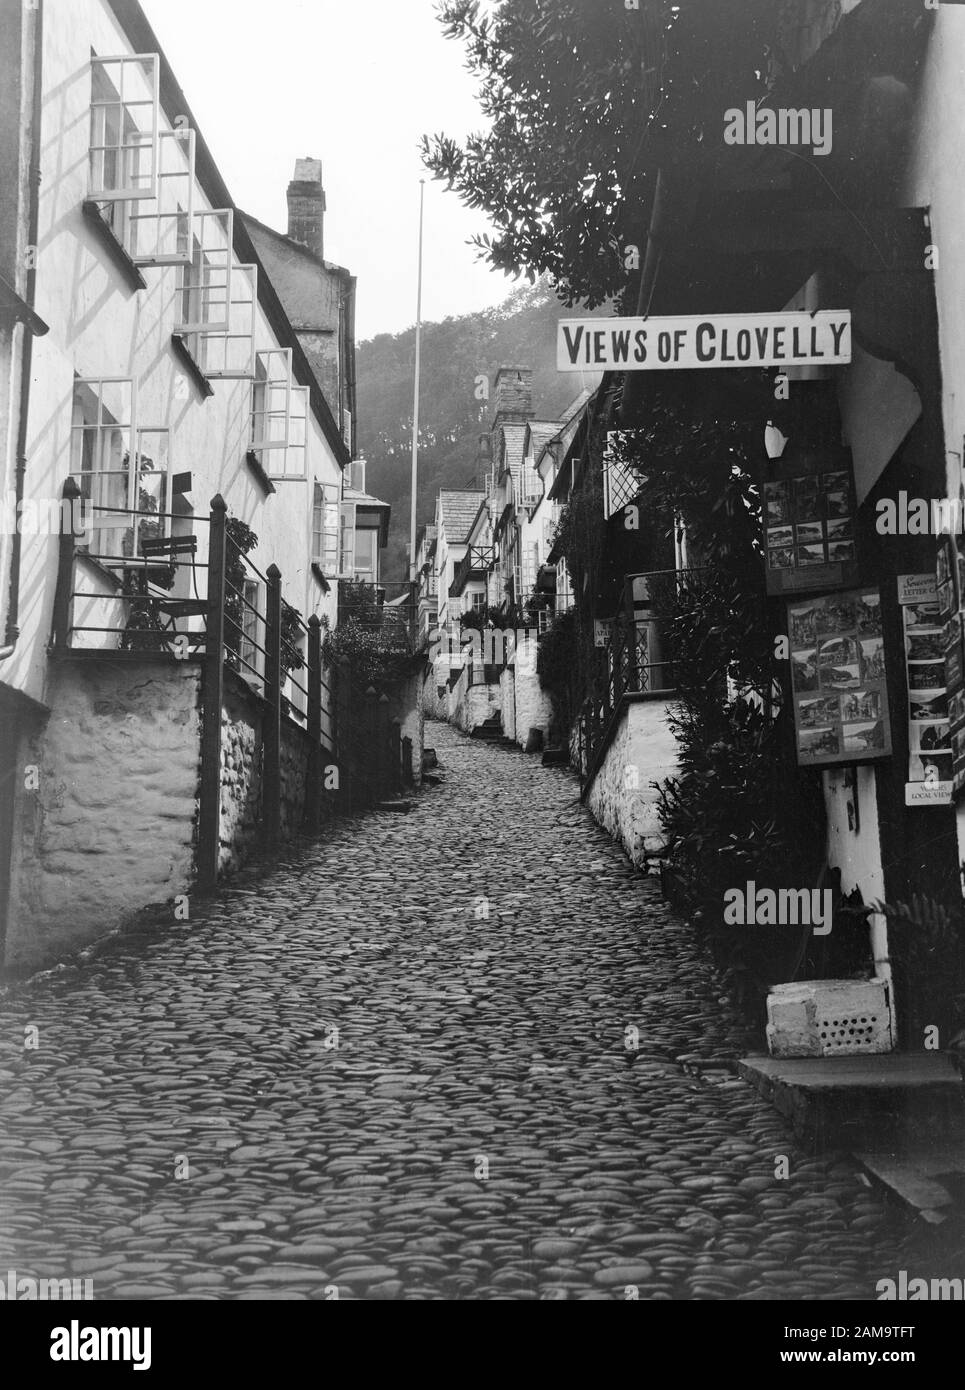 Archive image circa 1920s of Clovelly High Street, Devon, UK. Scanned from original negative Stock Photo